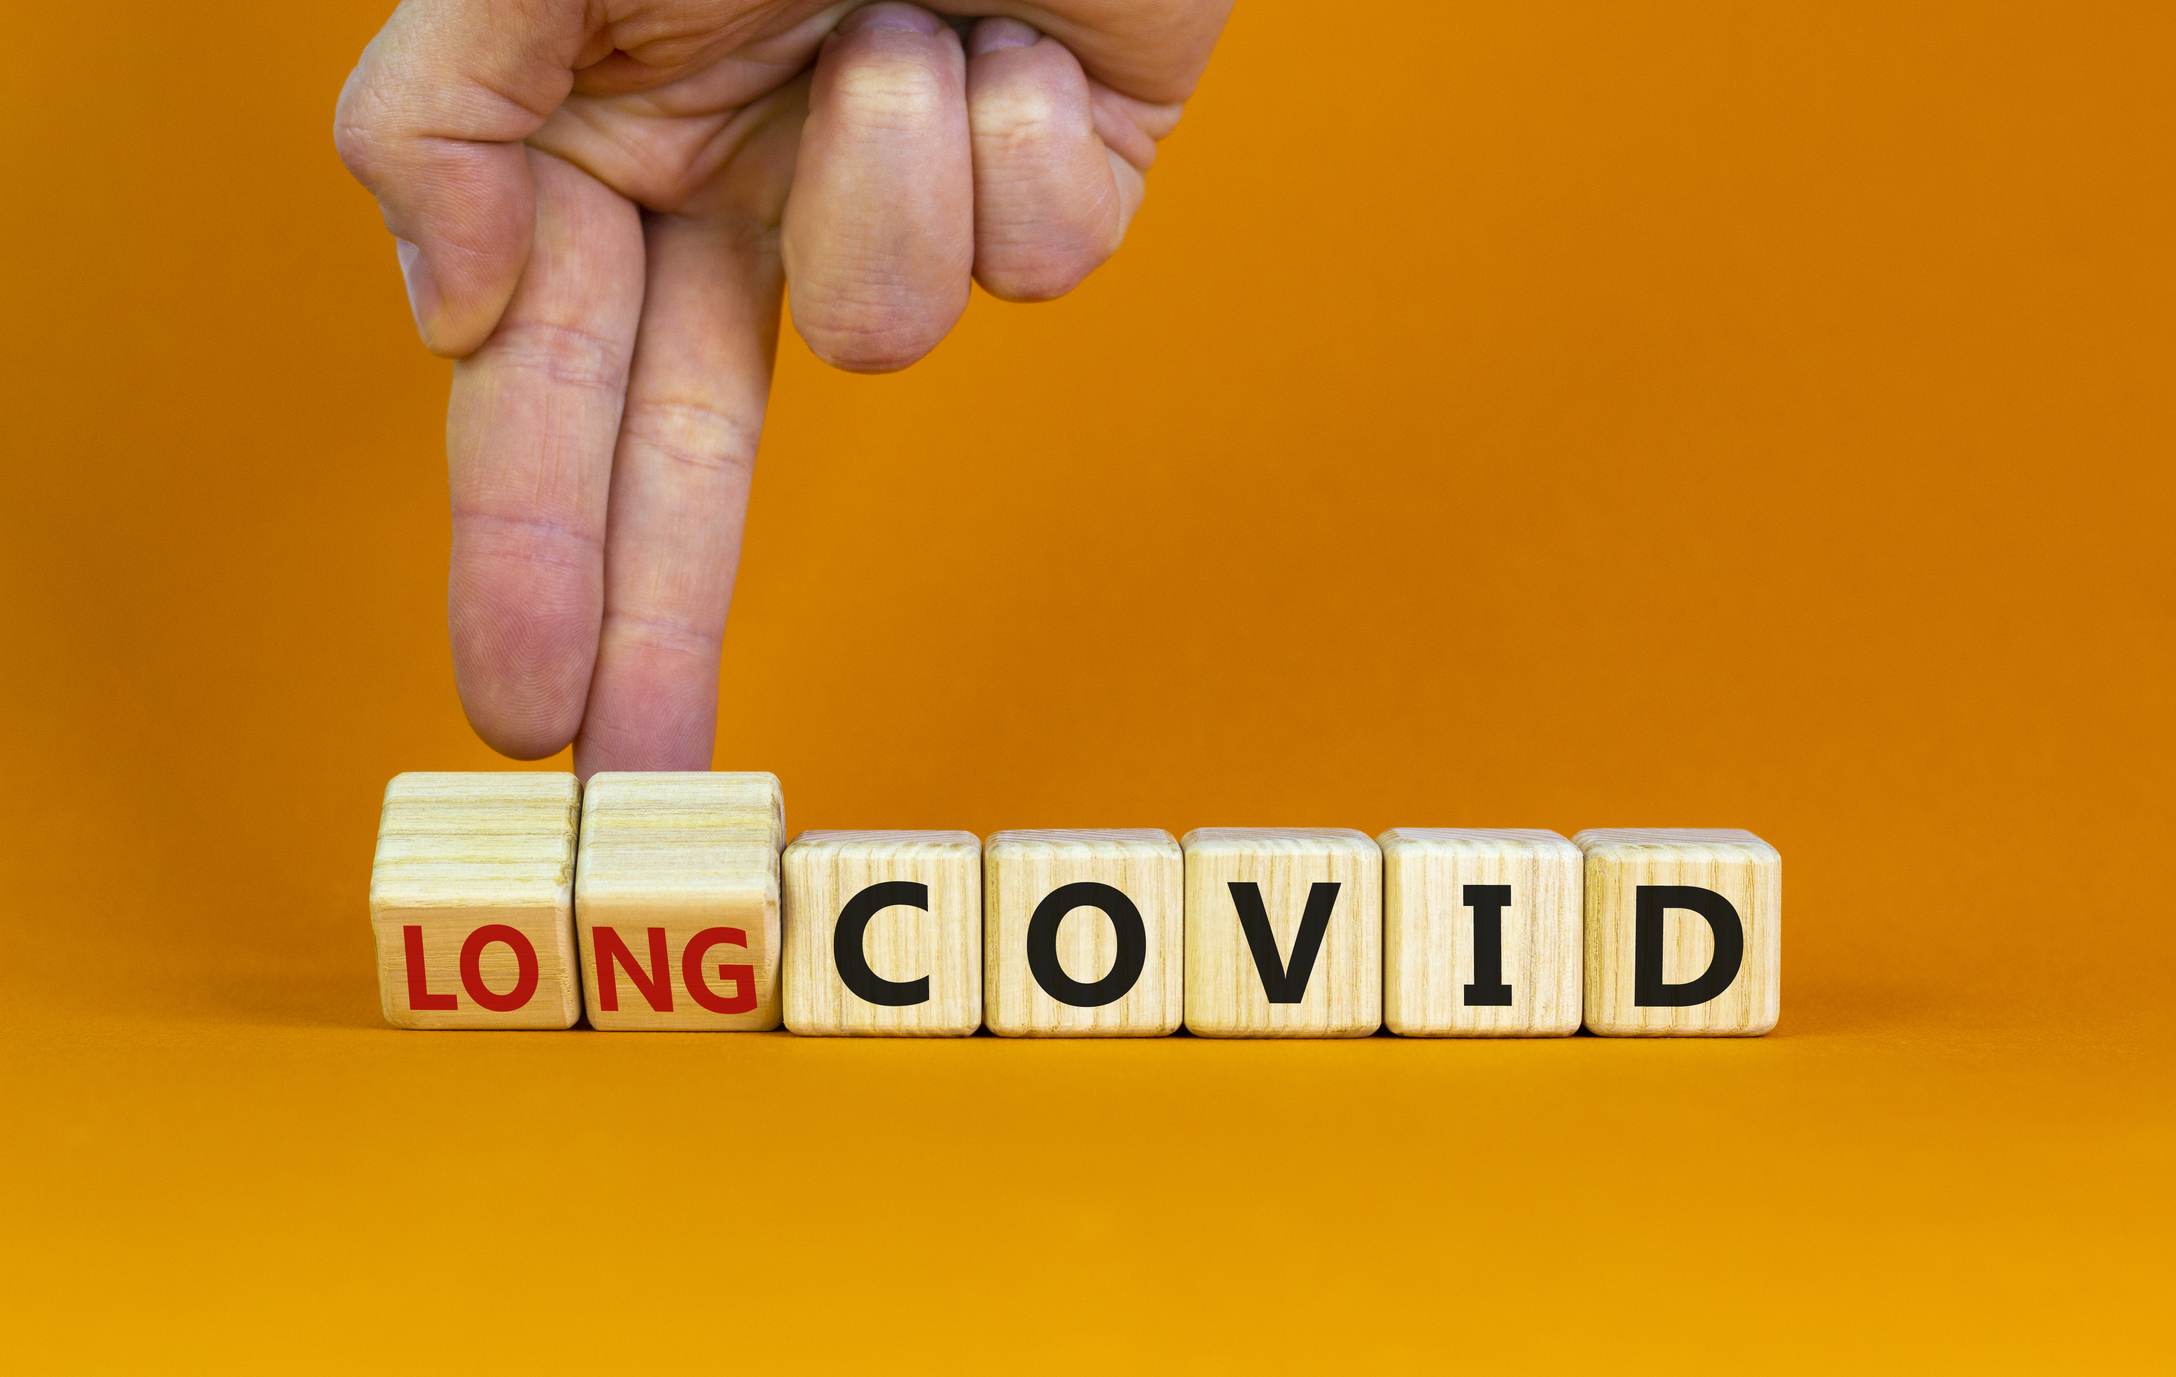 Long covid symbol. Doctor turnes wooden cubes and changes words 'covid' to 'long covid'. Beautiful orange background, copy space. Medical, covid-19 pandemic long covid concept. (Long covid symbol. Doctor turnes wooden cubes and changes words 'covid' t